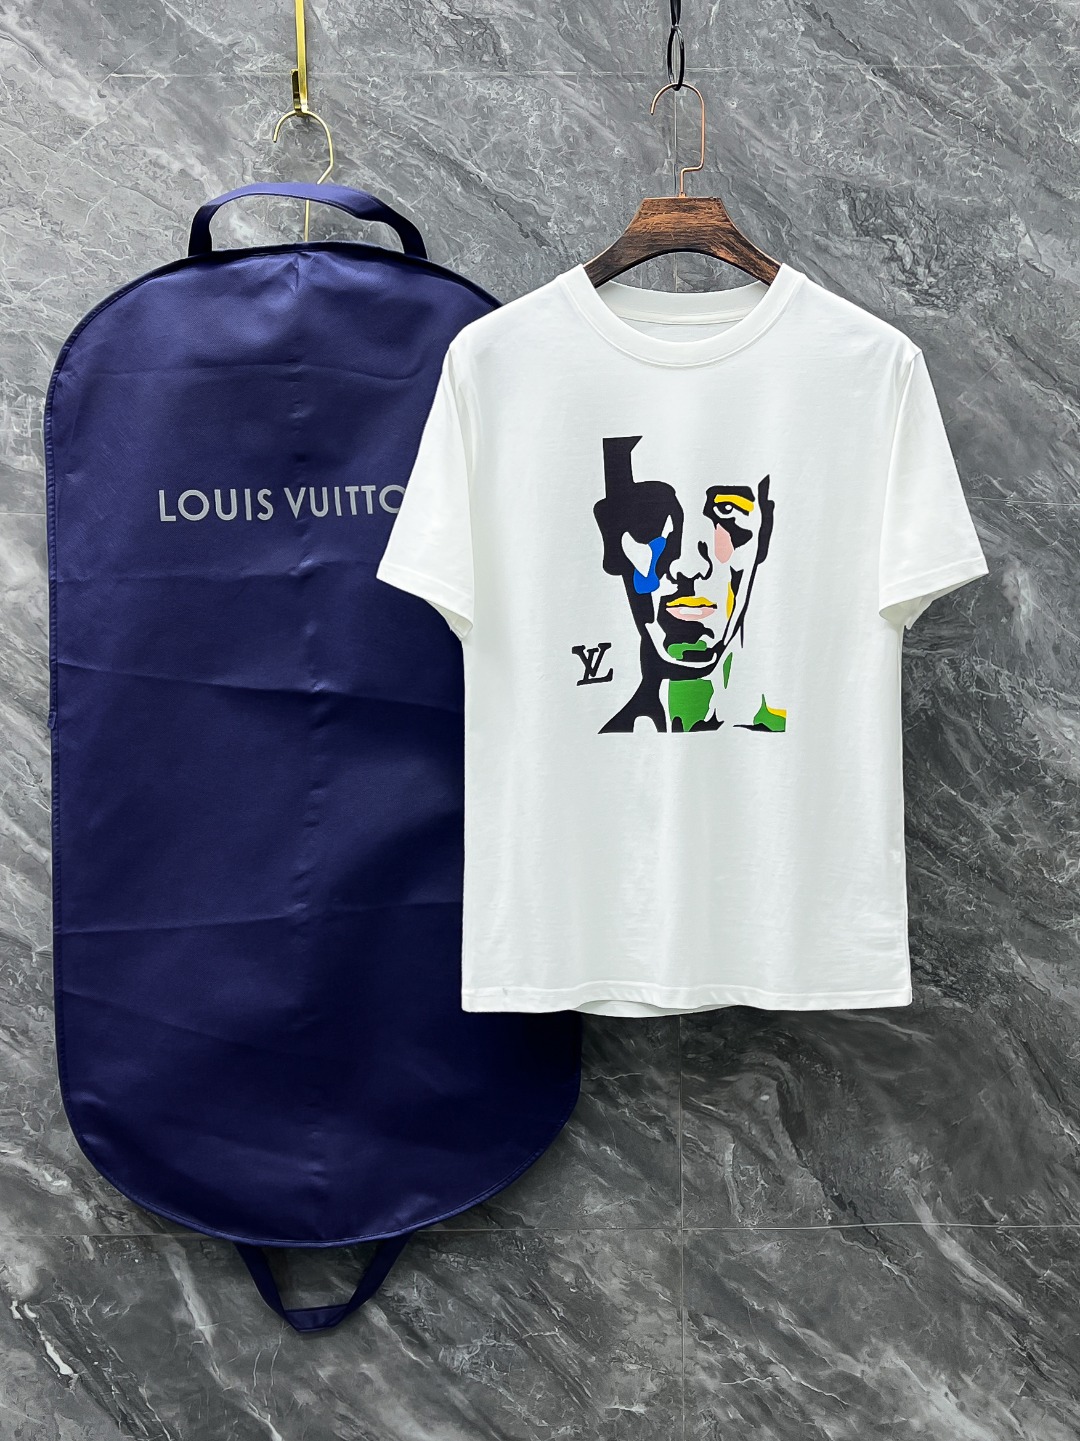 Louis Vuitton Clothing T-Shirt Black White Spring/Summer Collection Fashion Short Sleeve